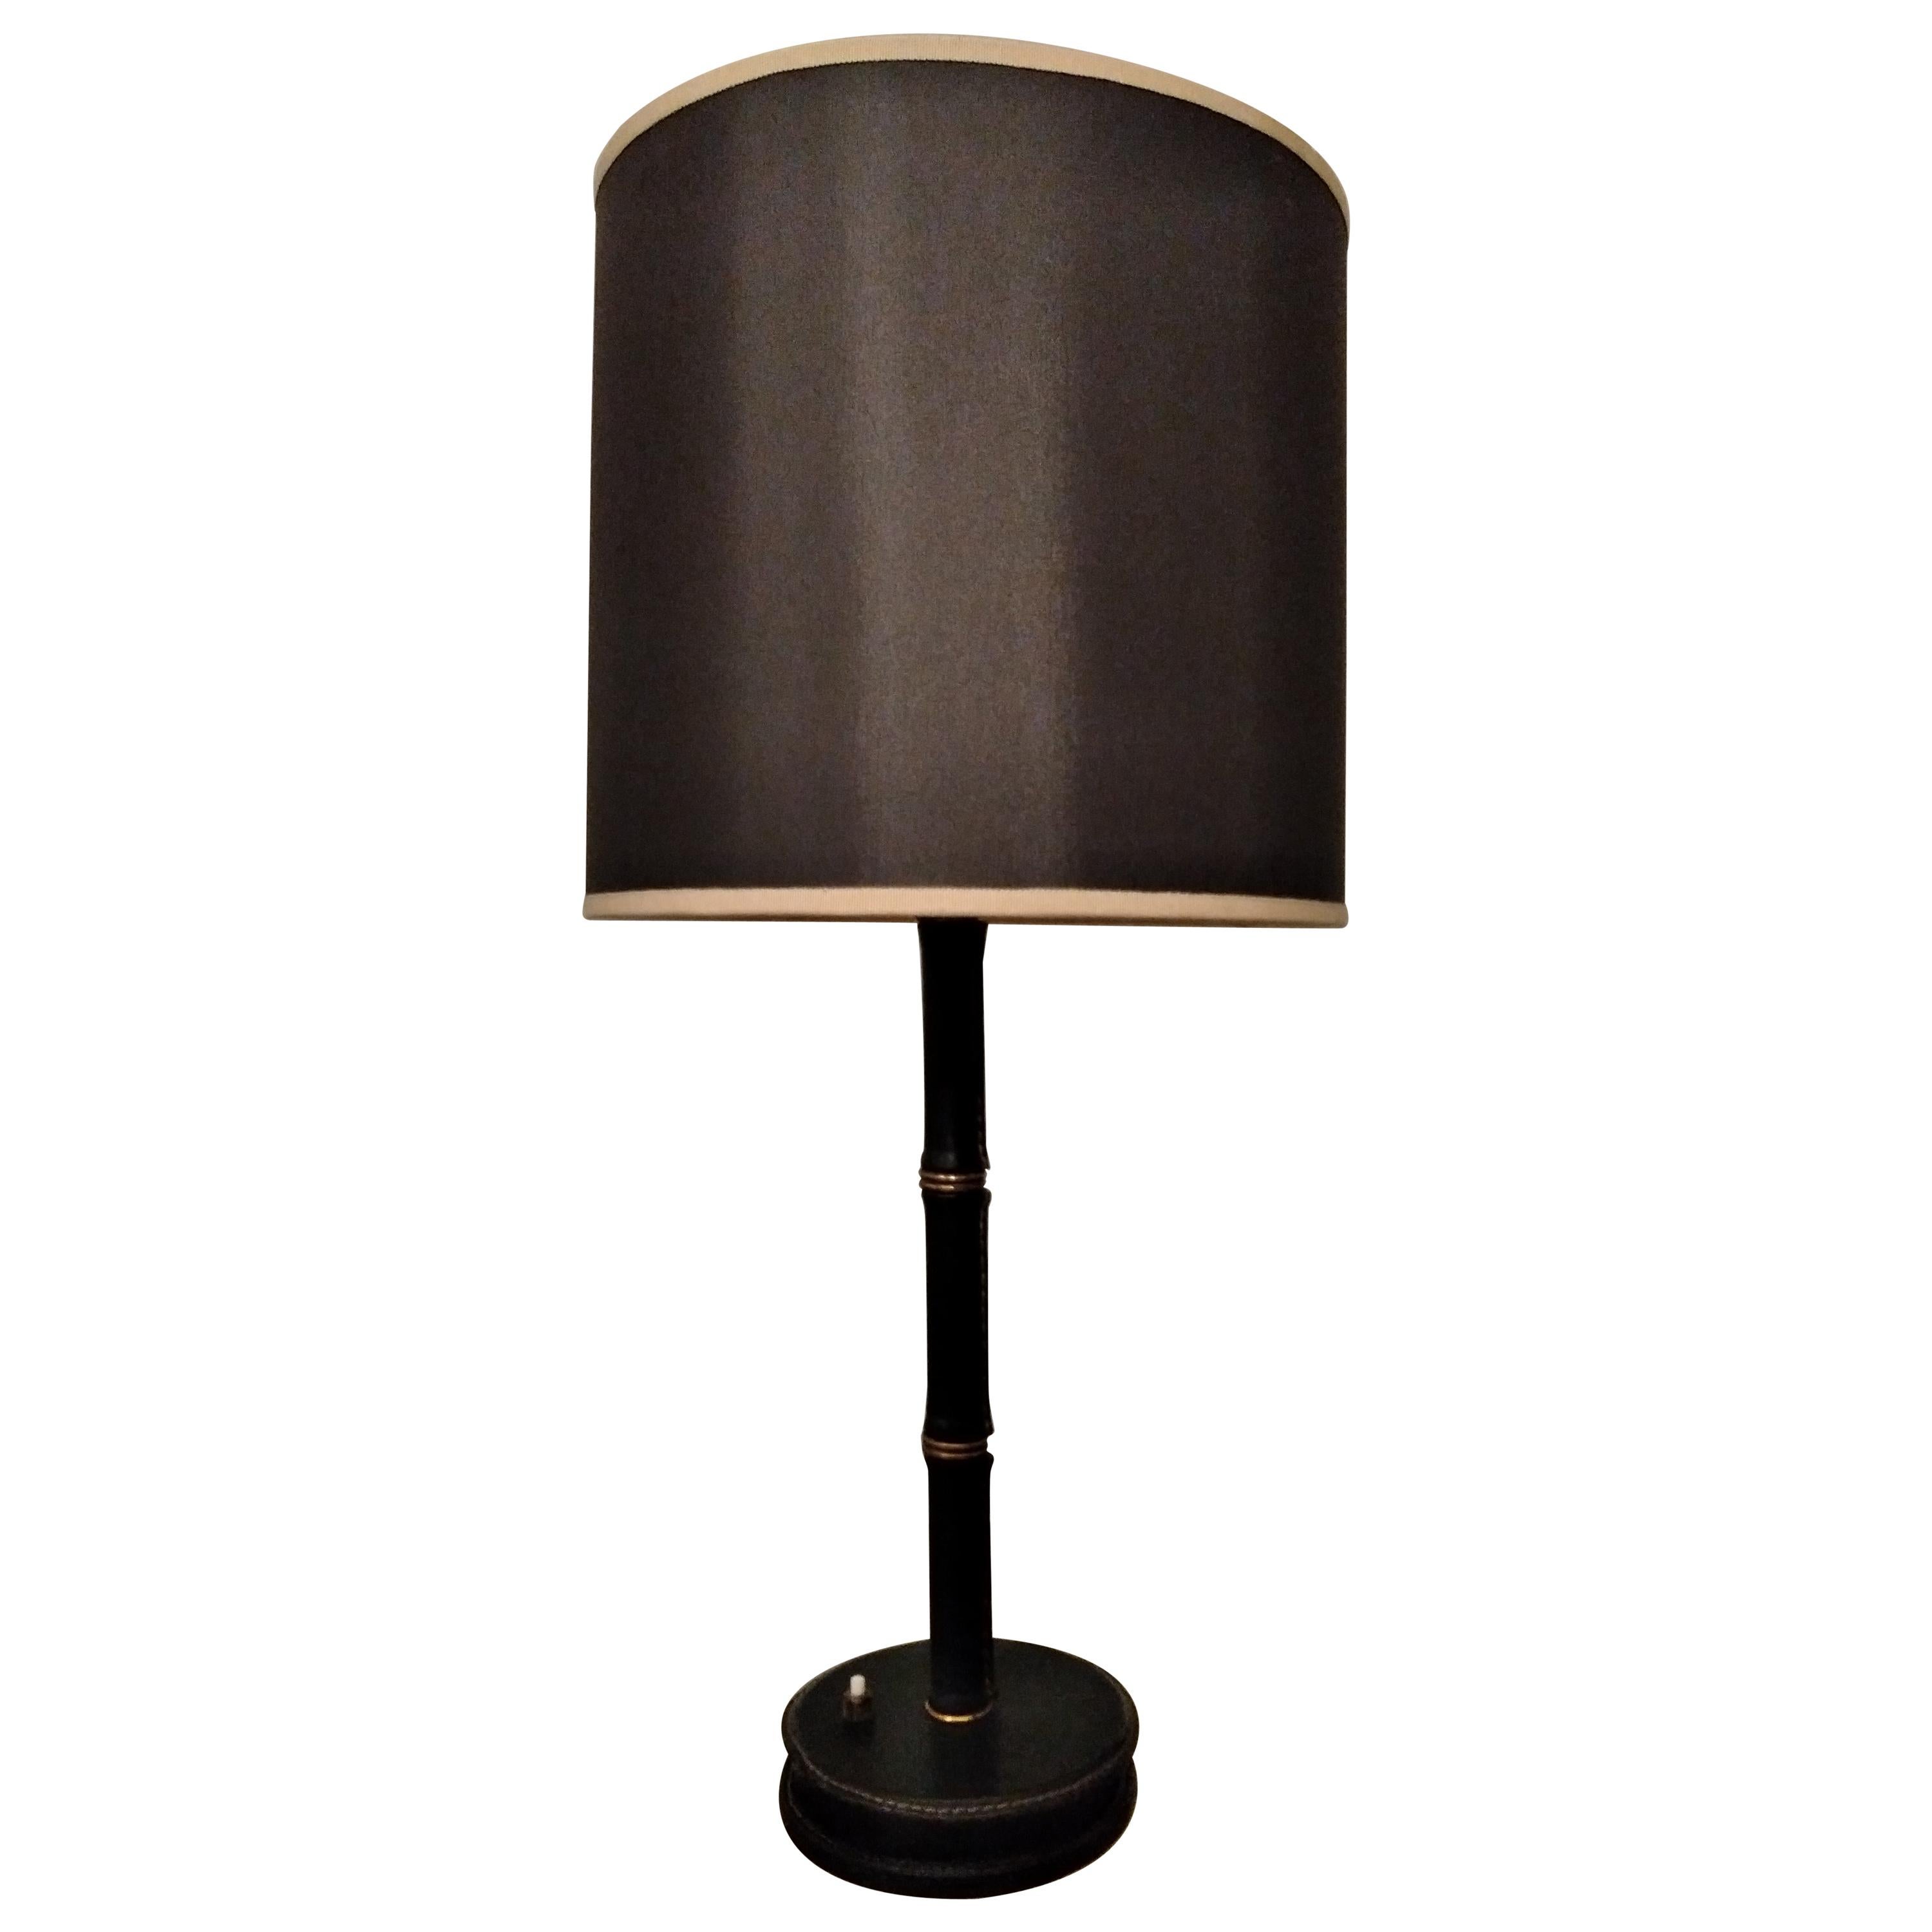 Jacques Adnet Black Stitched Leather Table Lamp, Bamboo Form, French, 1950s For Sale